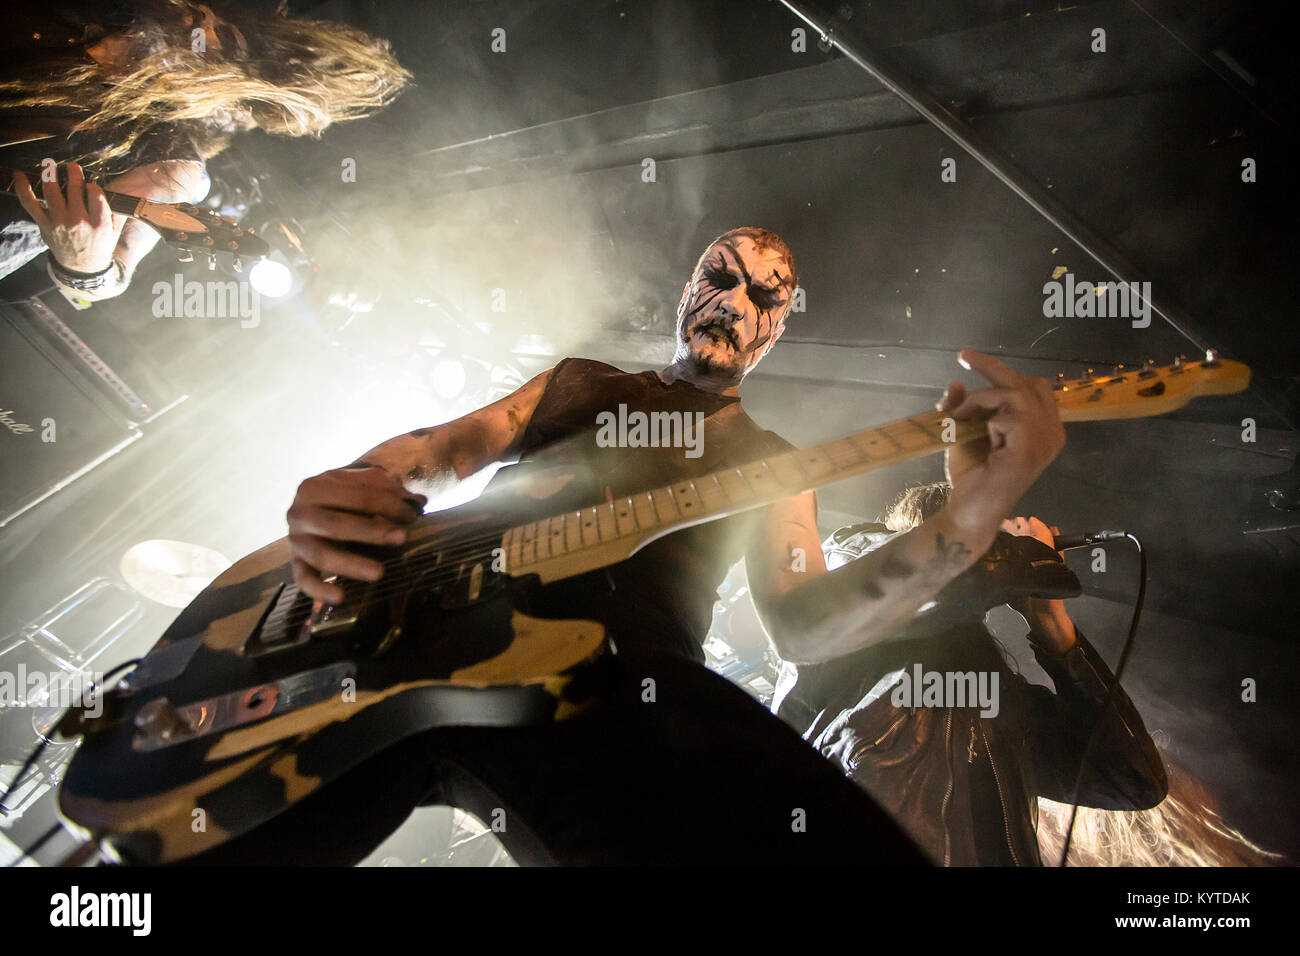 The Norwegian black metal band Gaahls Wyrd performs a live concert at Garage in Bergen. Here guitarist Stian Kaarstad is seen live on stage. Norway, 06/05 2016. Stock Photo